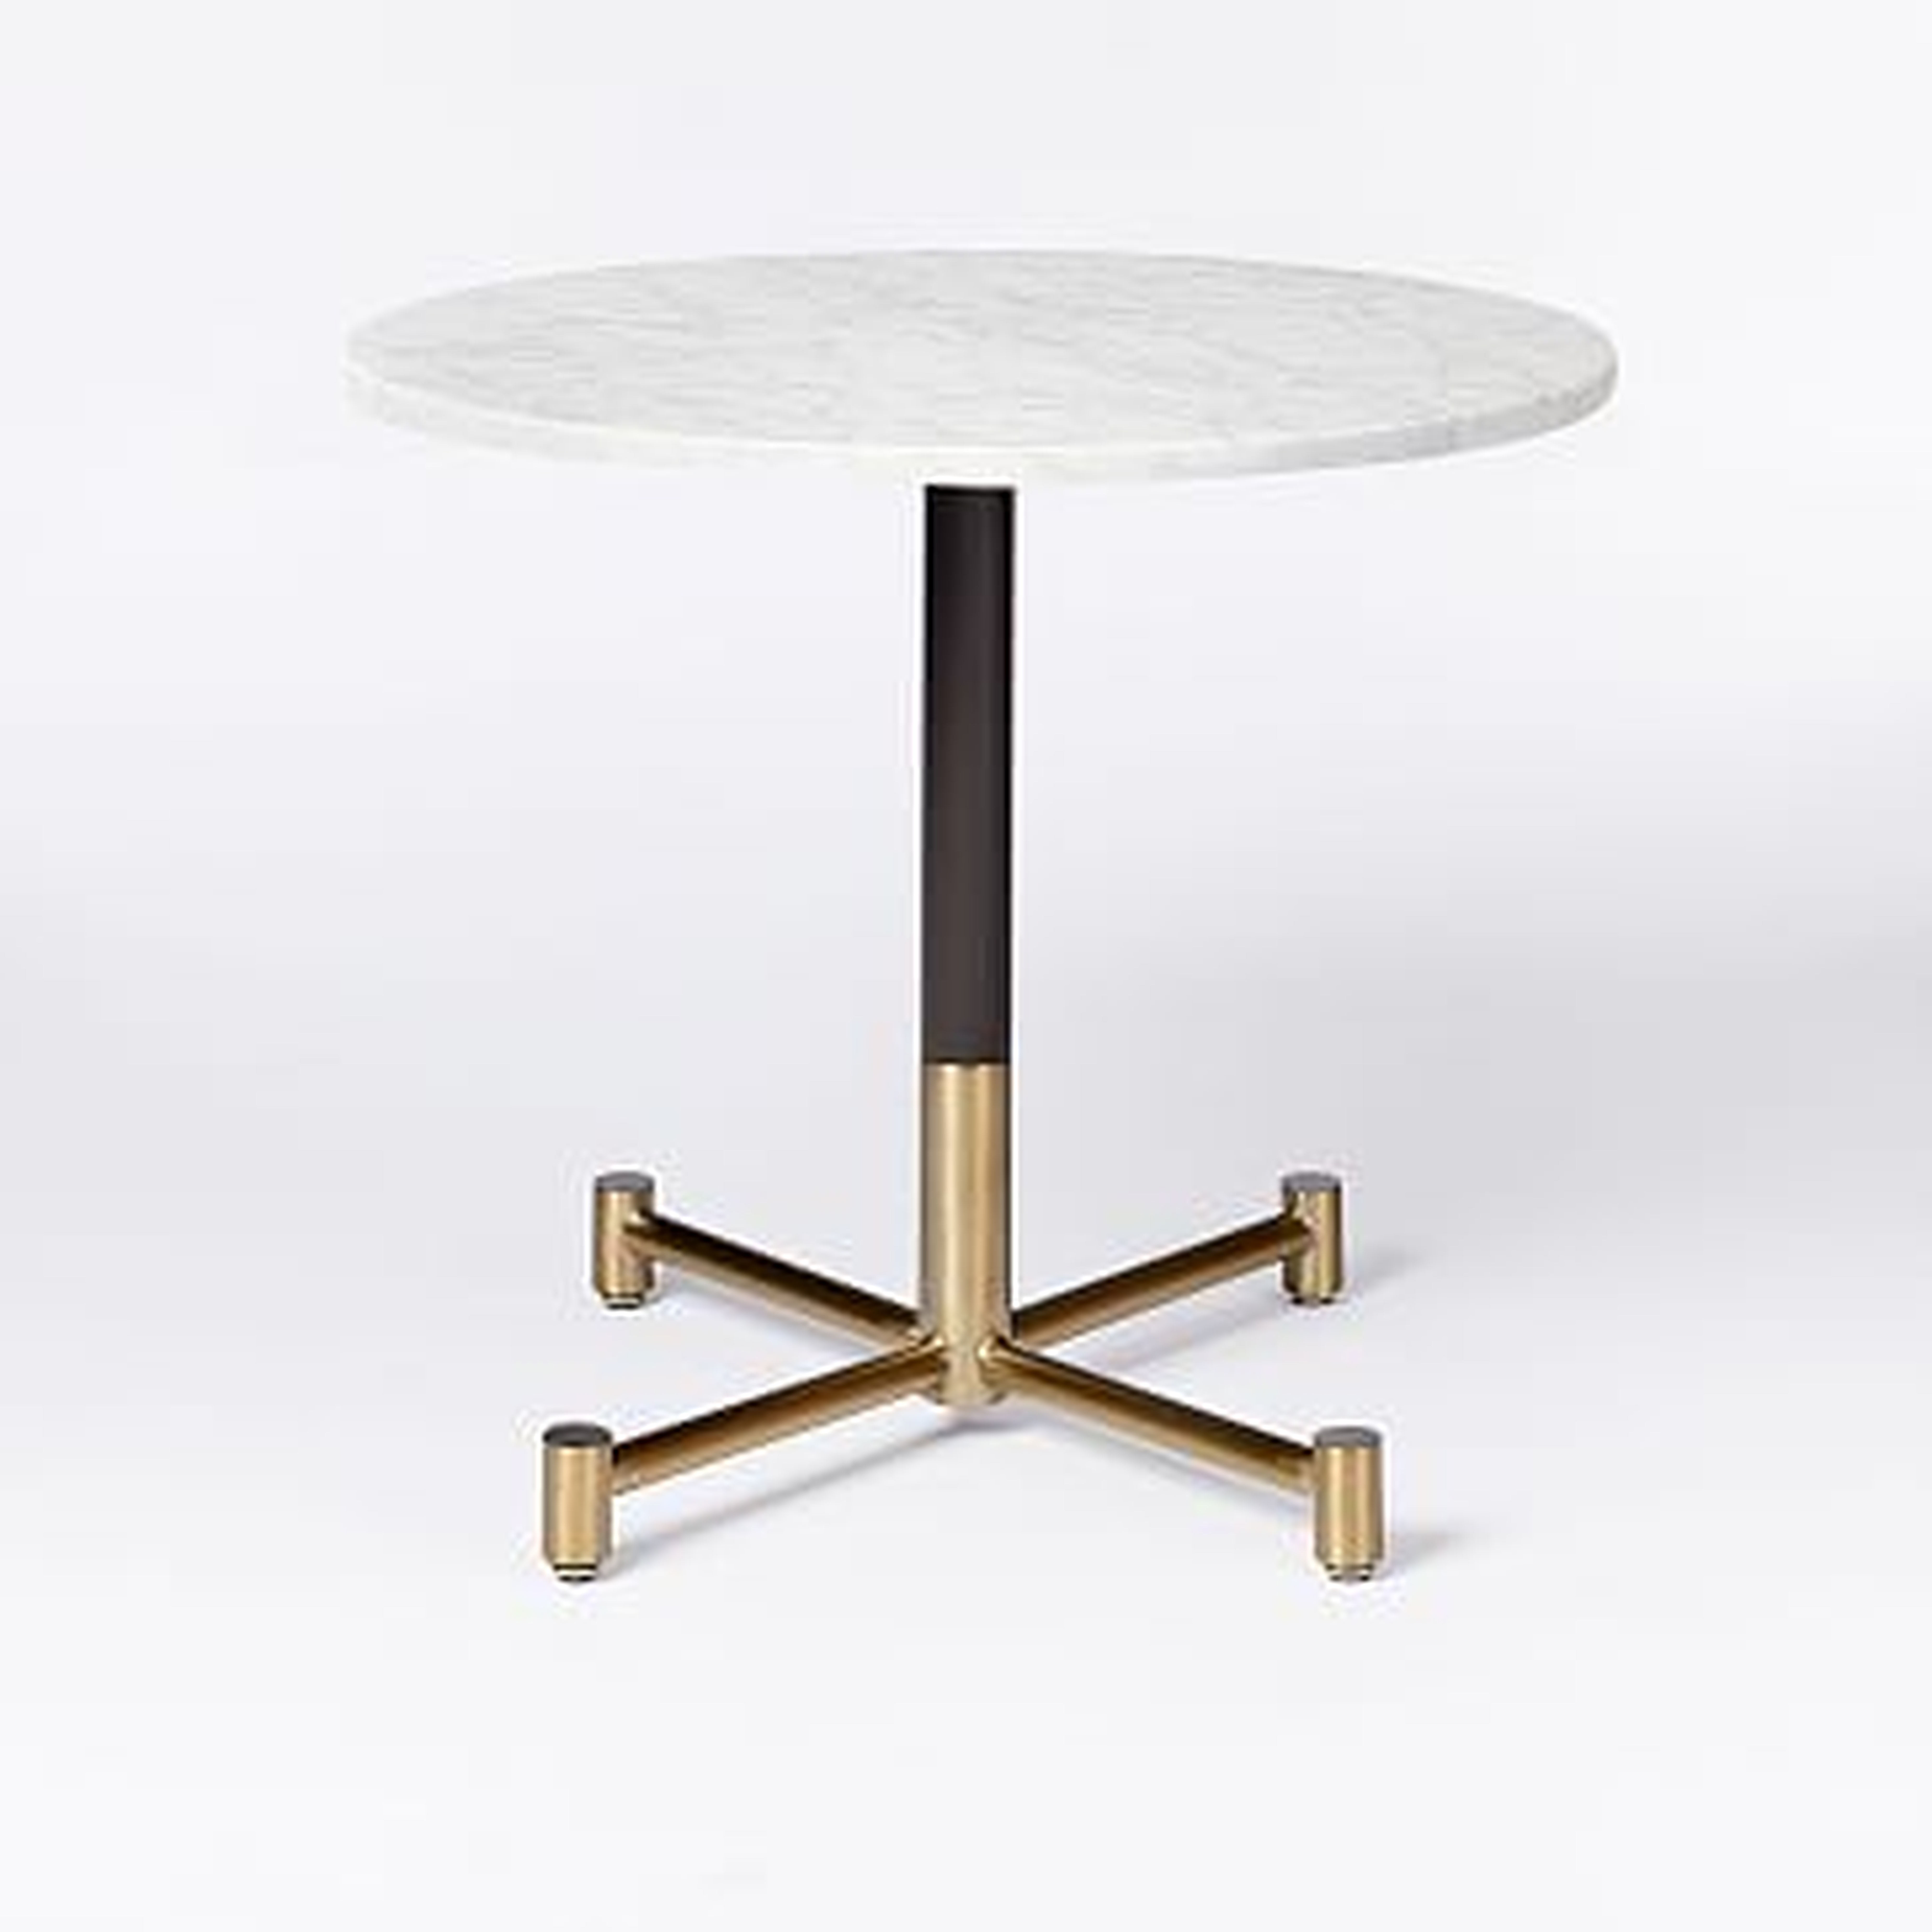 Branch Base Round Dining Table, White Marble, Antique Bronze/Blackened Brass - West Elm